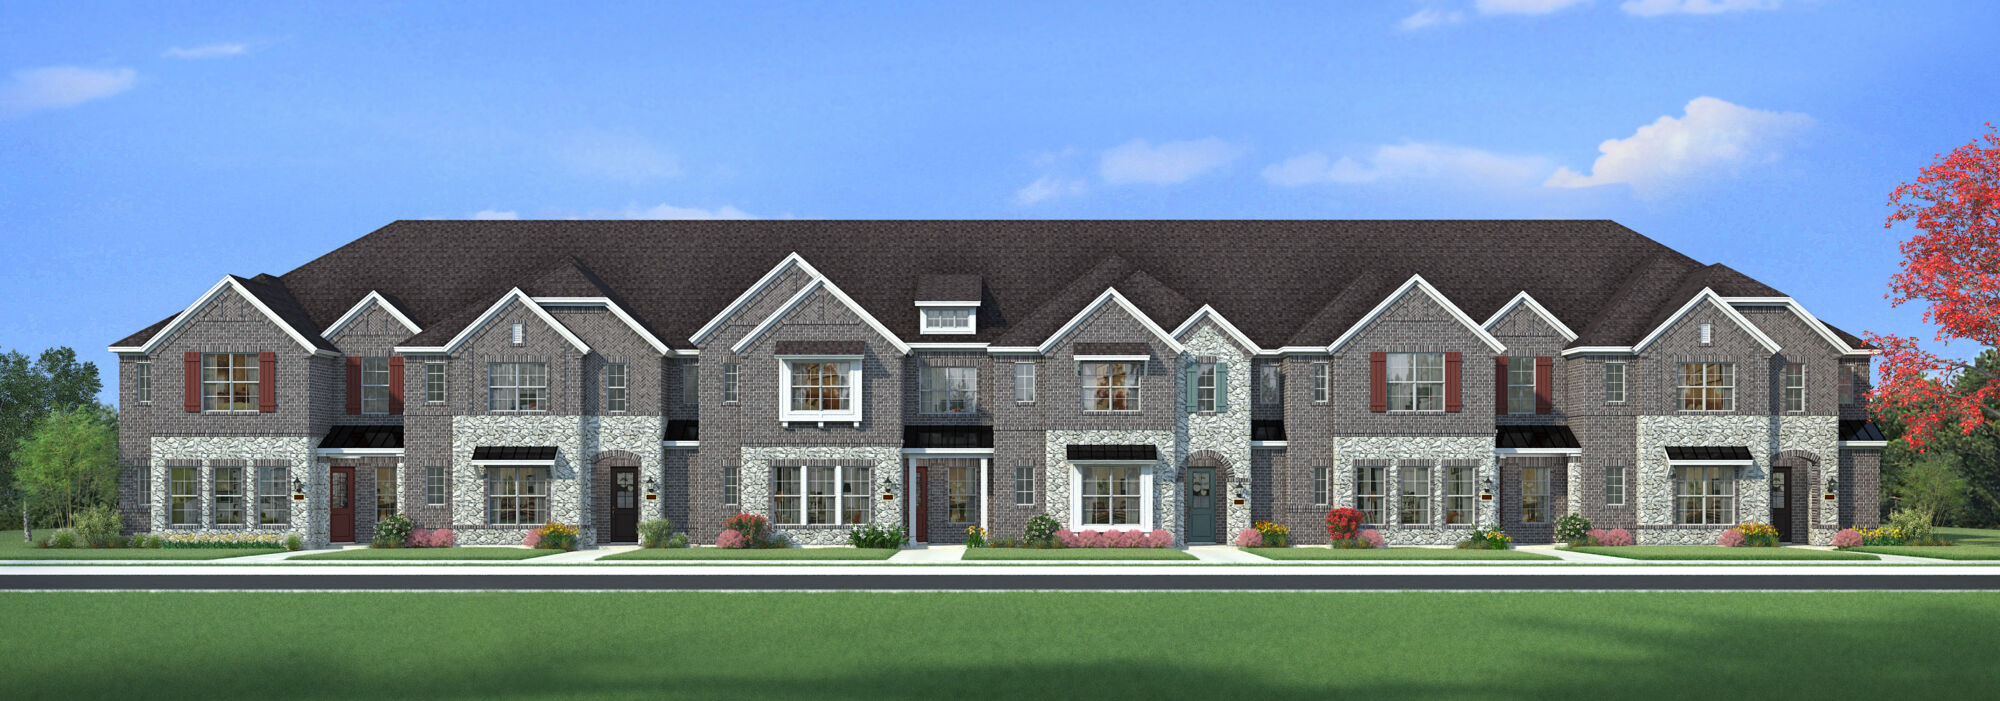 Town Homes with window, exterior stone and exterior brick